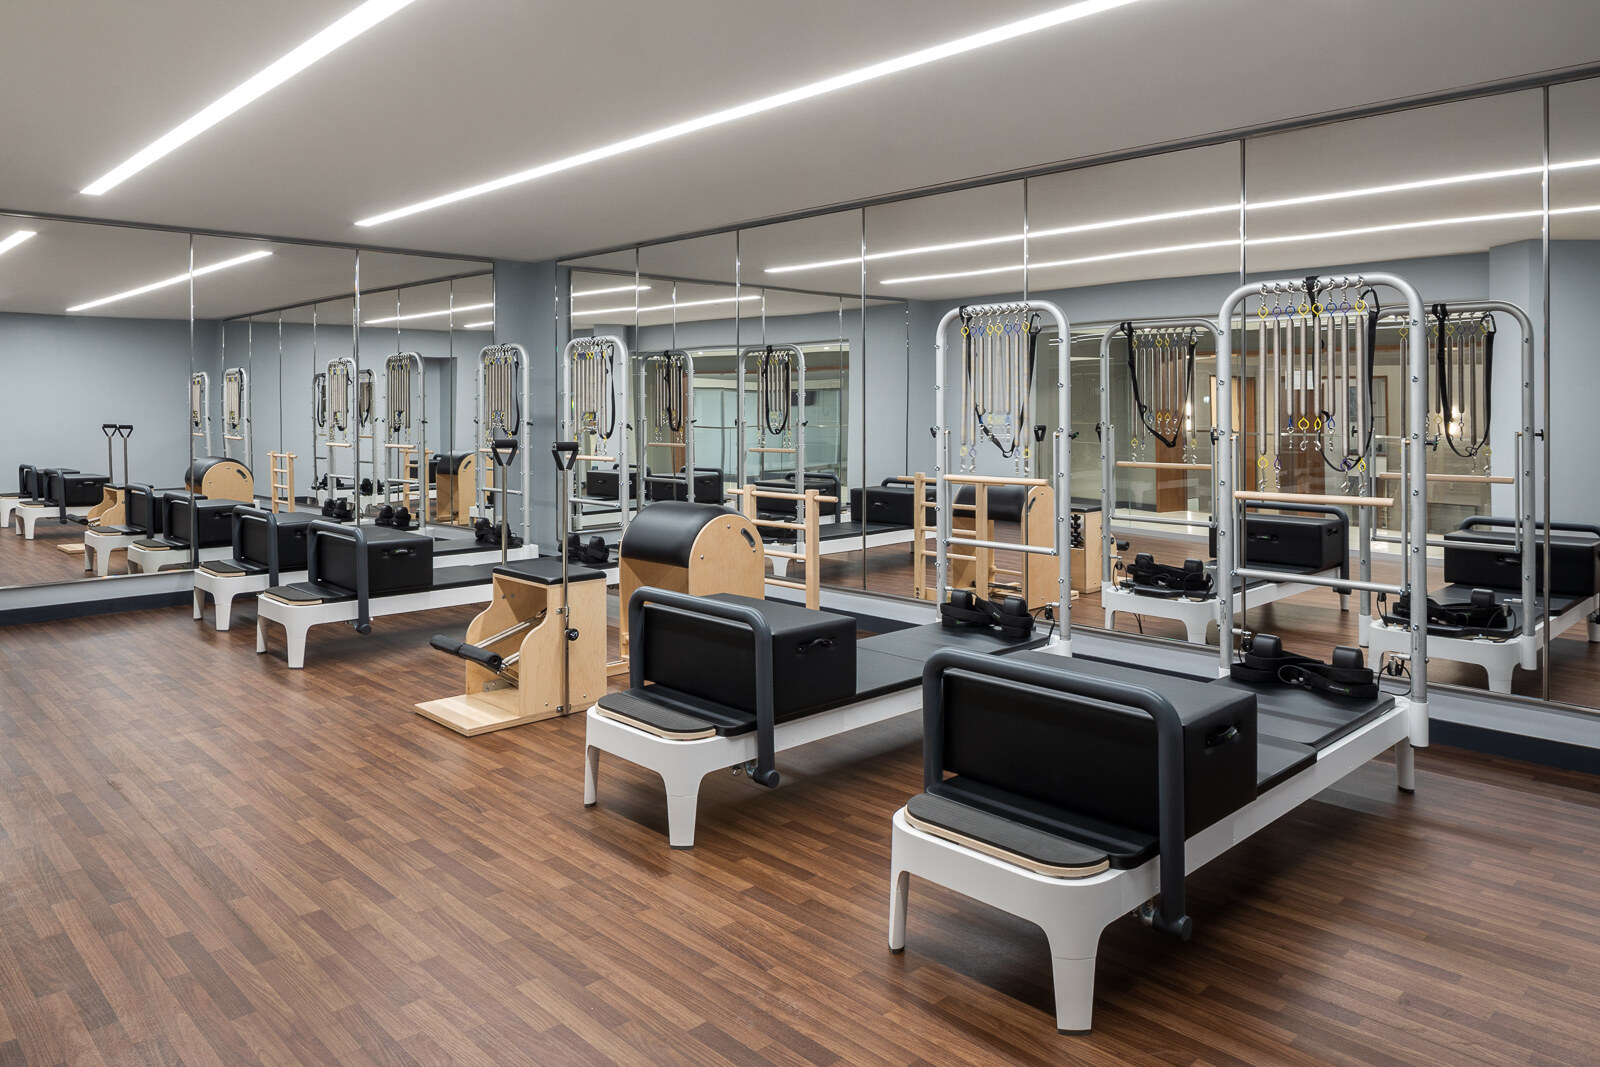 A pristine and modern pilates studio equipped with reformer machines, ready for a full-body workout session.